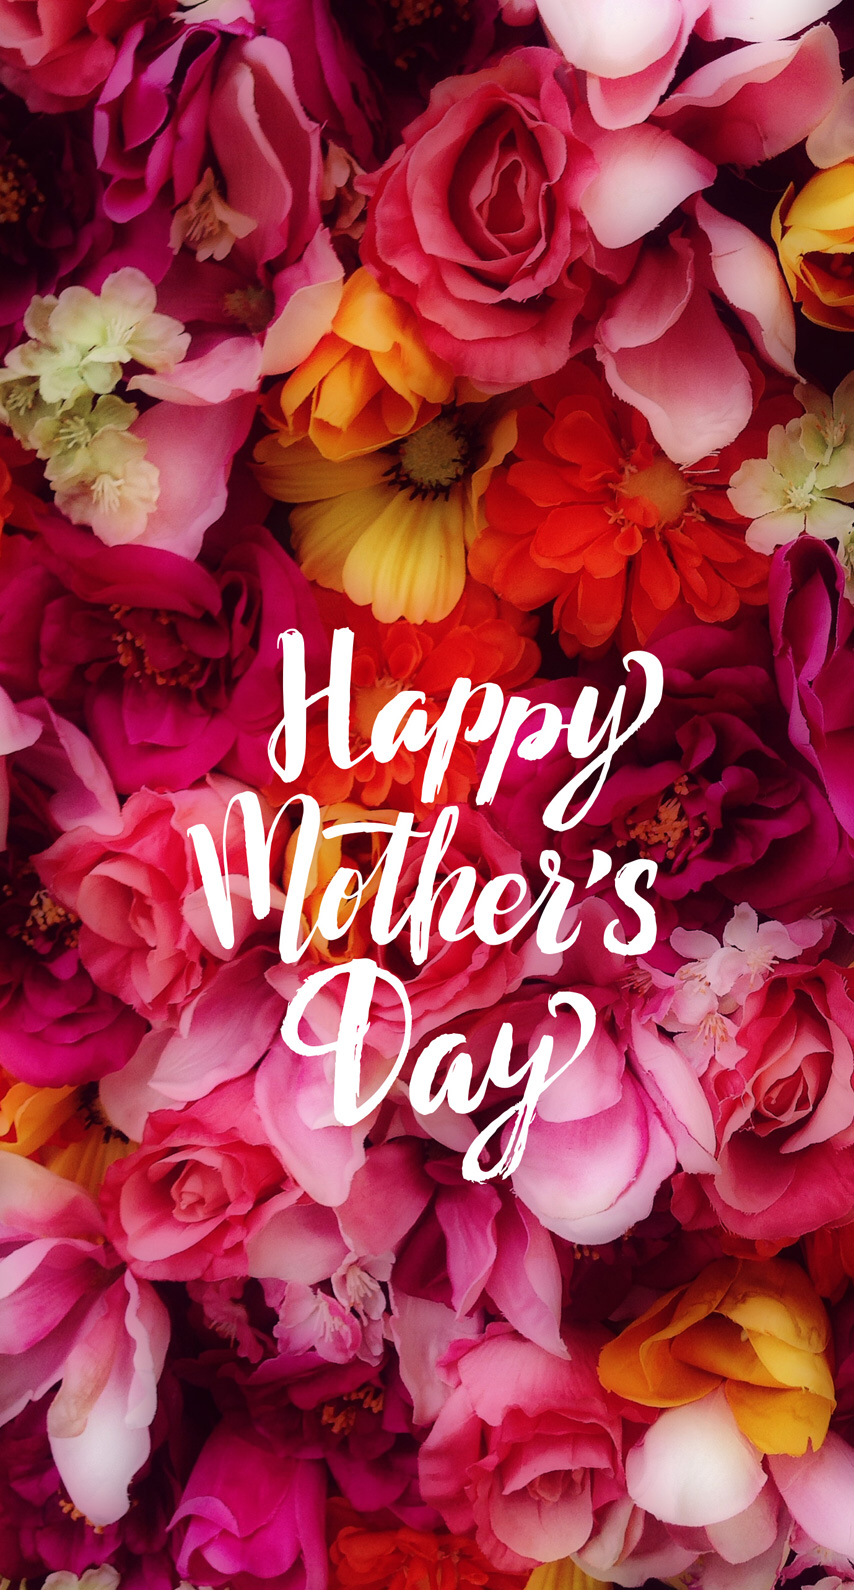 IPhone Walls: Mother's Day ideas. happy mothers day, mothers day, mother's day